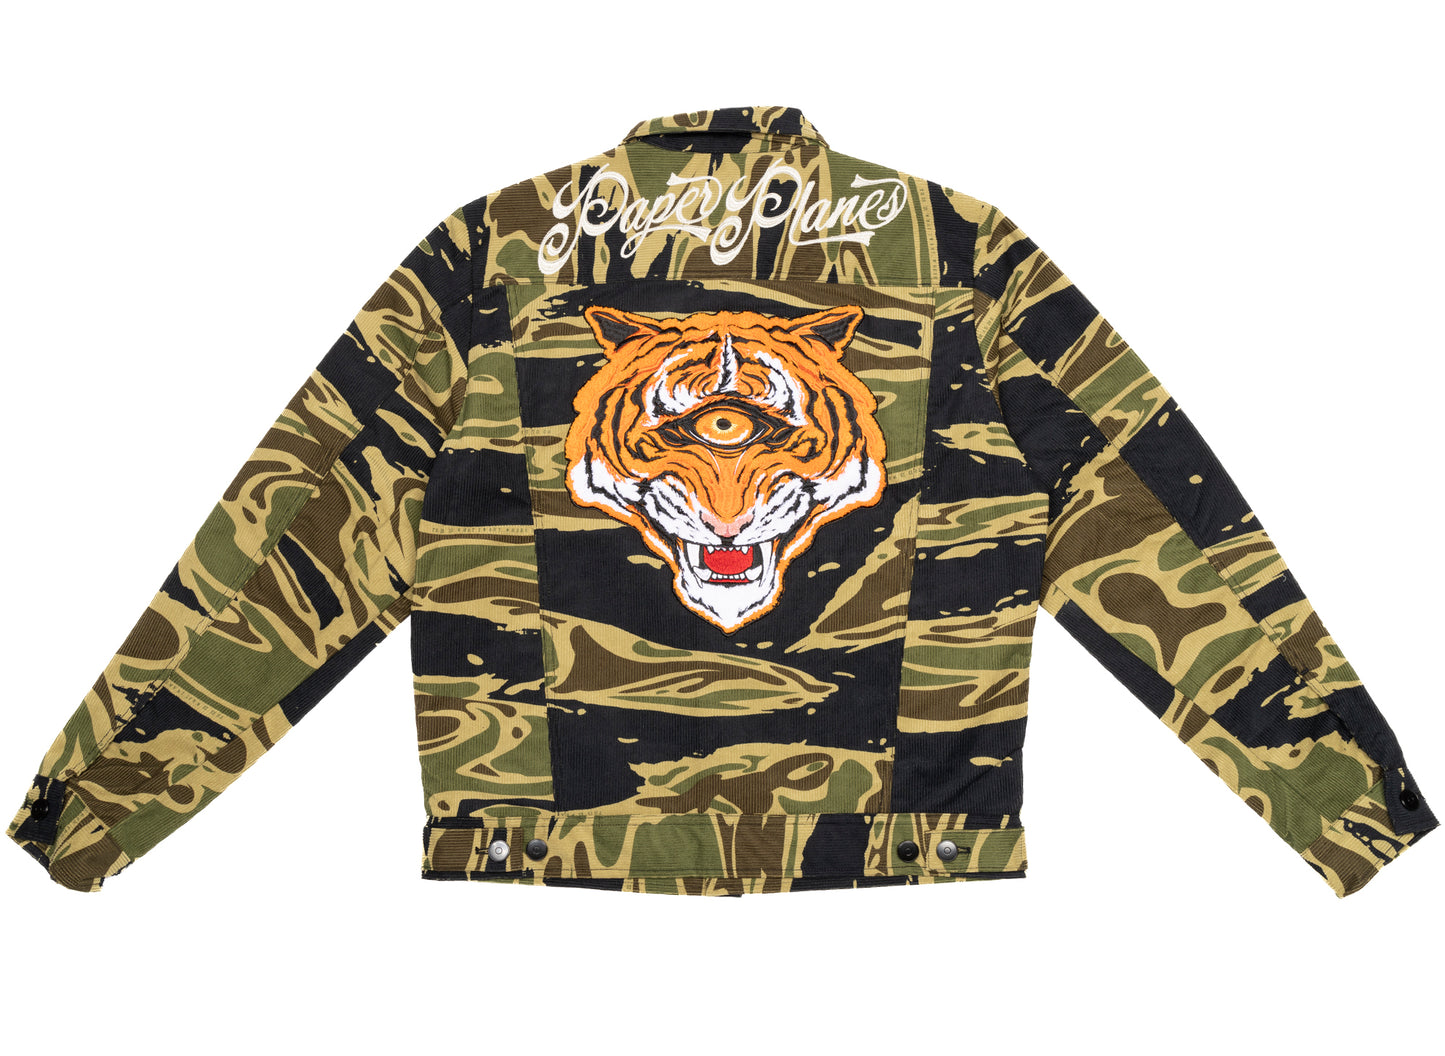 Paper Planes Eye of the Tiger Trucker Jacket